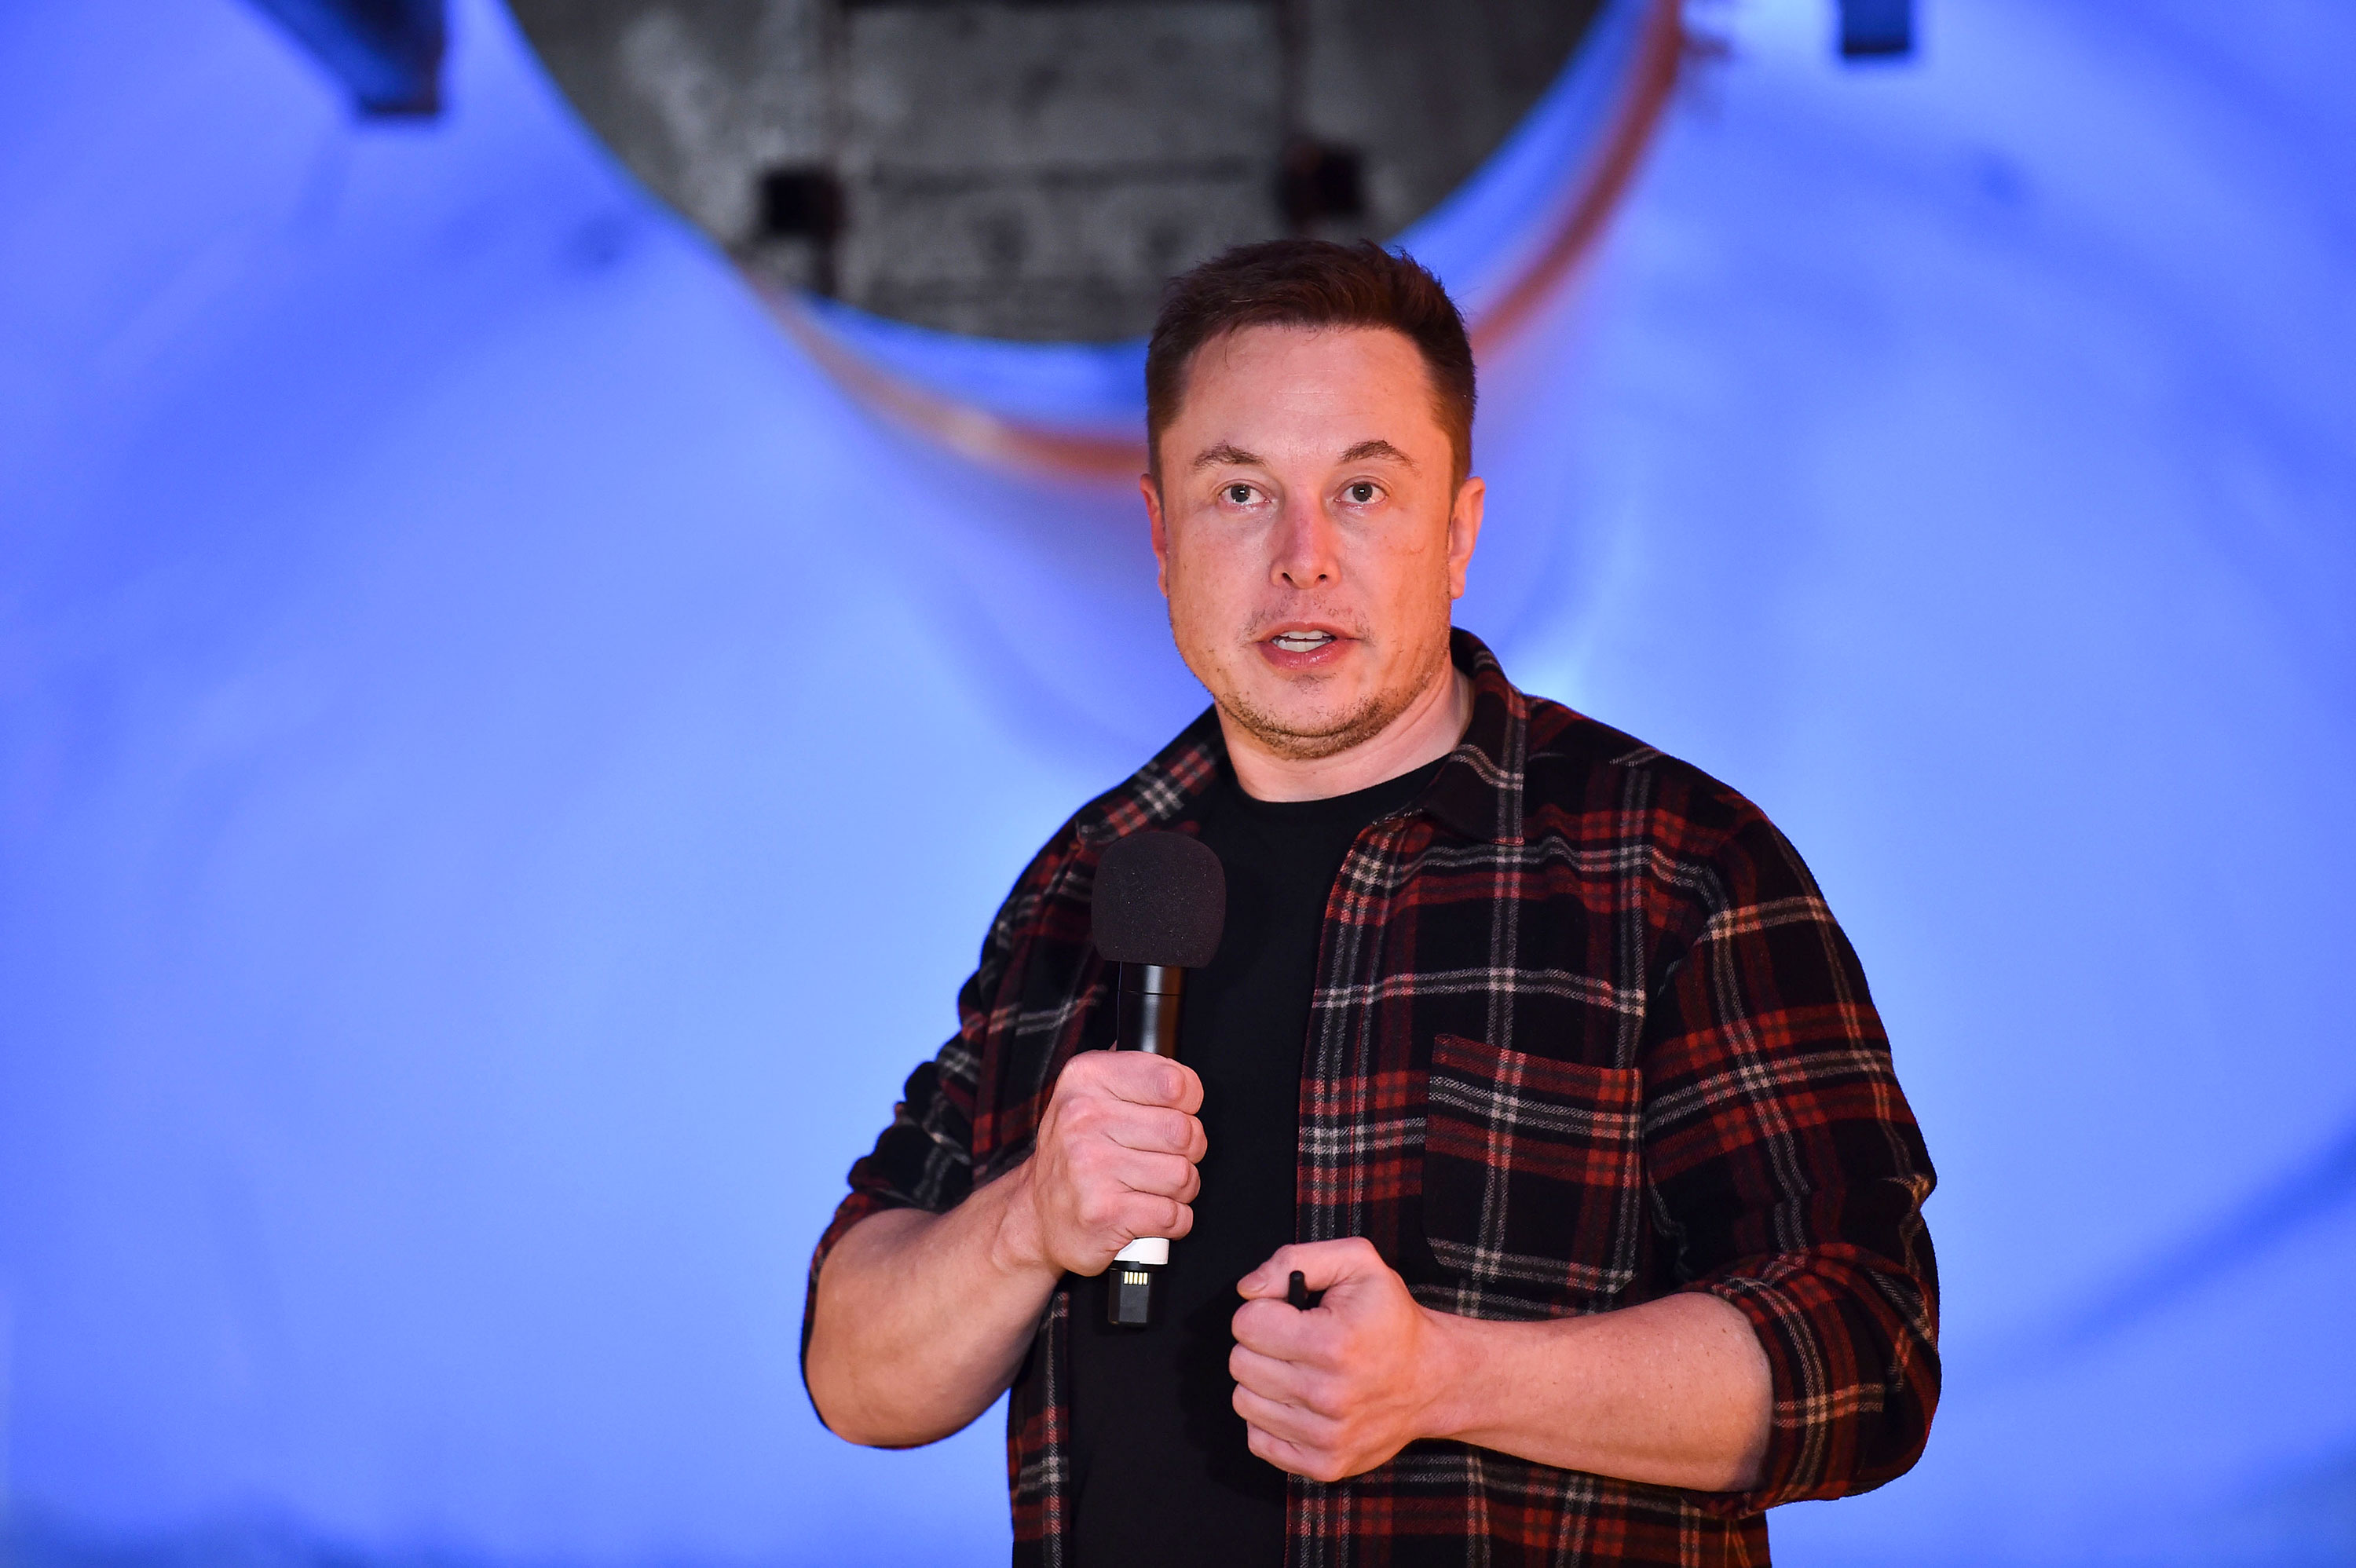 Elon Musk, co-founder and CEO of Tesla Inc., speaks during an unveiling event for the Boring Company Hawthorne test tunnel in Hawthorne, south of Los Angeles, California, December 18, 2018.